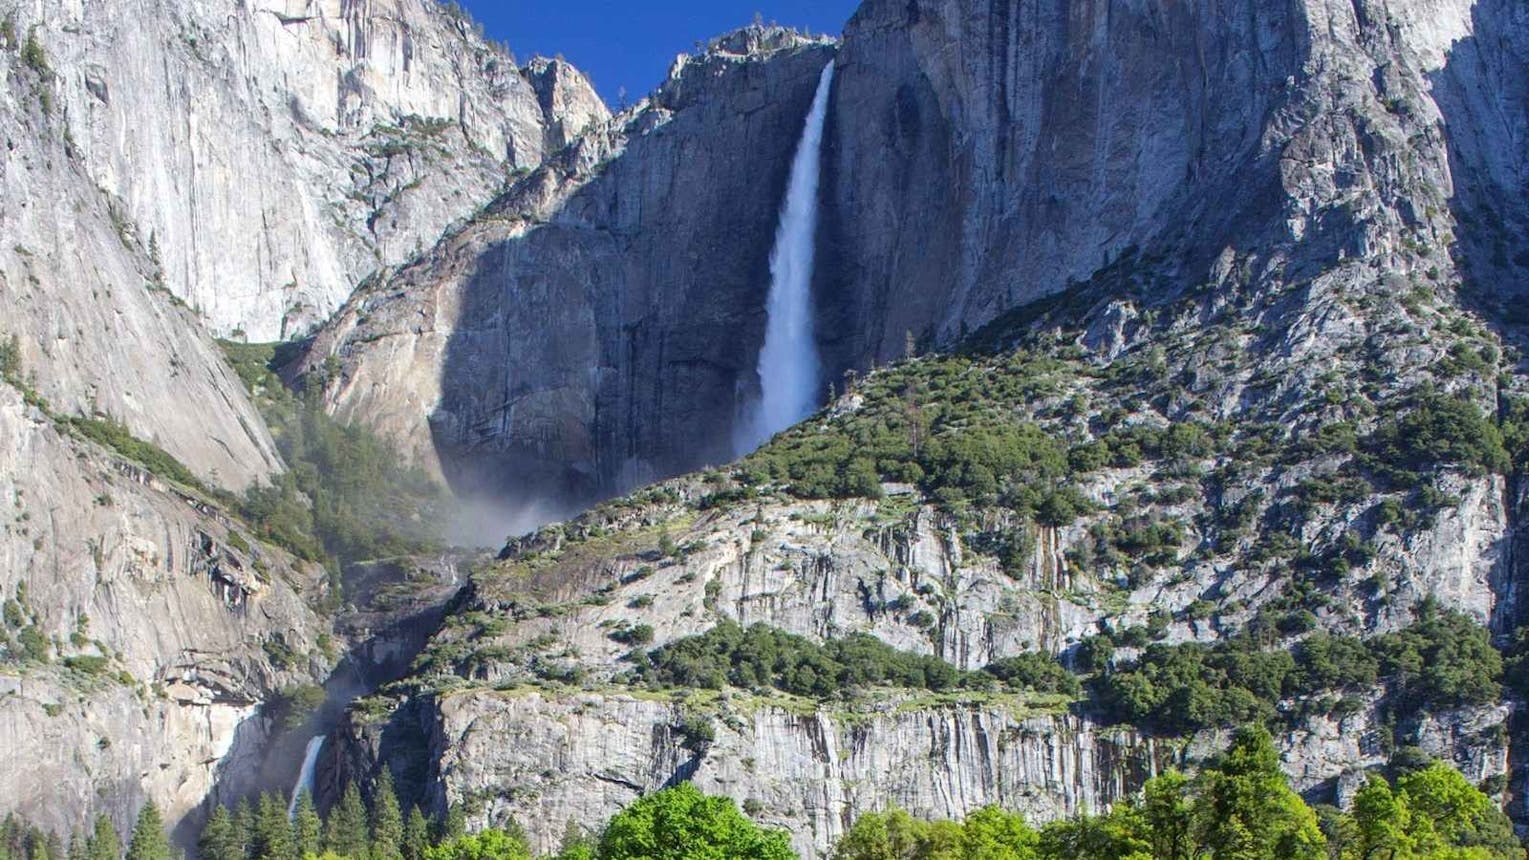 Waterfall in full flow down a rock face in Yosemite National Park.